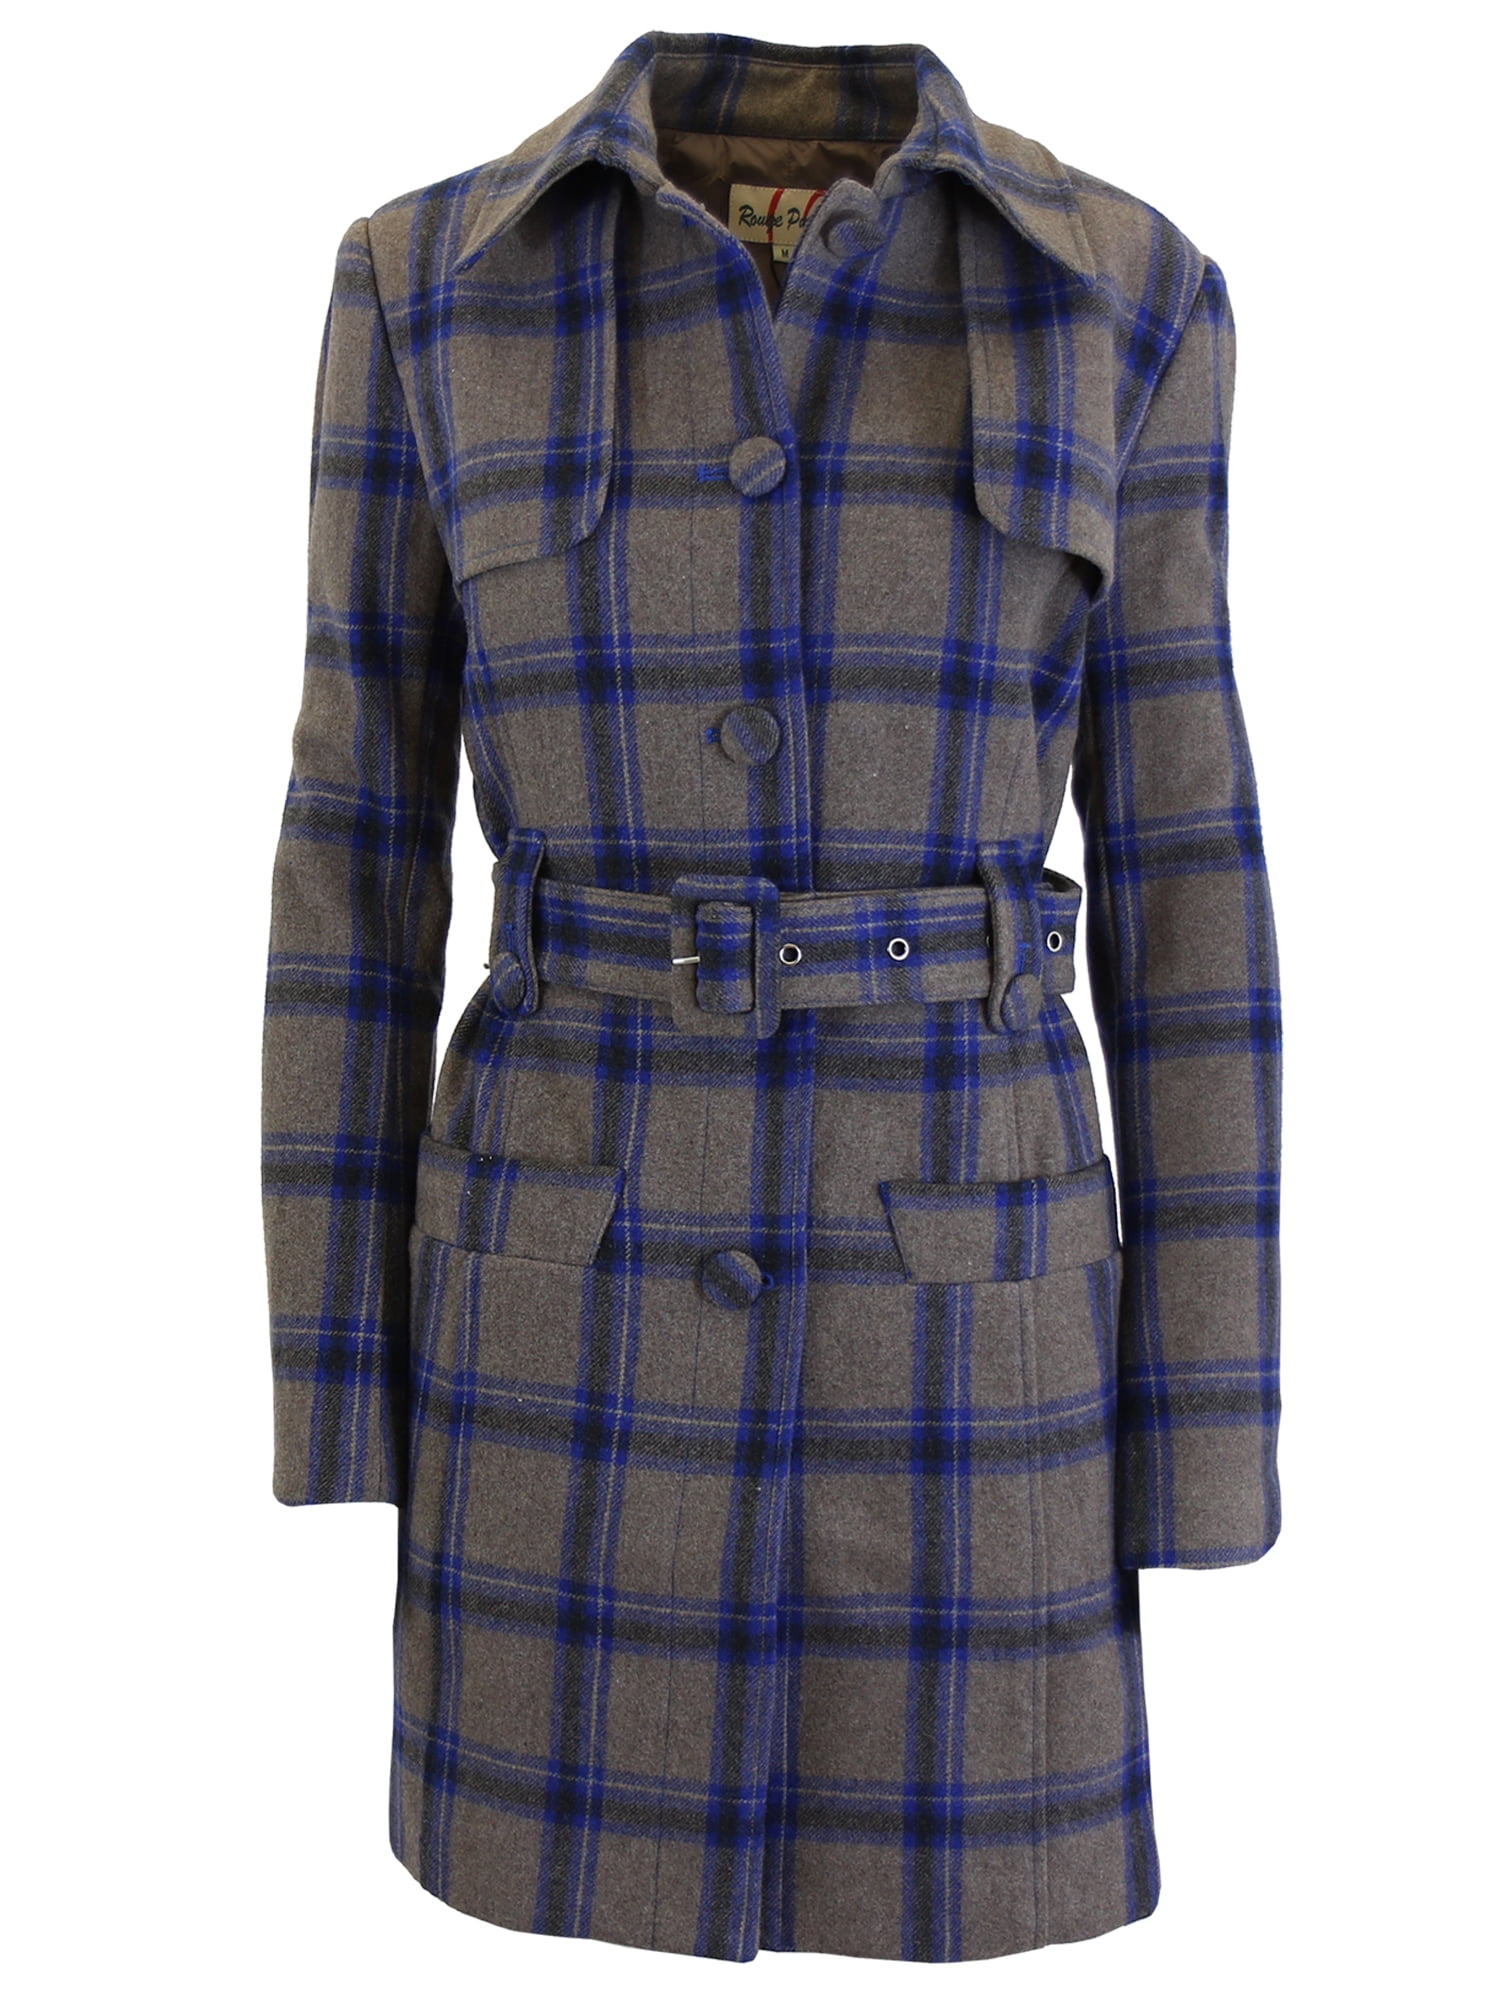 Women?s Wool Plaid Trench Coat Jacket With Belt - SLIM-FIT DESIGN ...